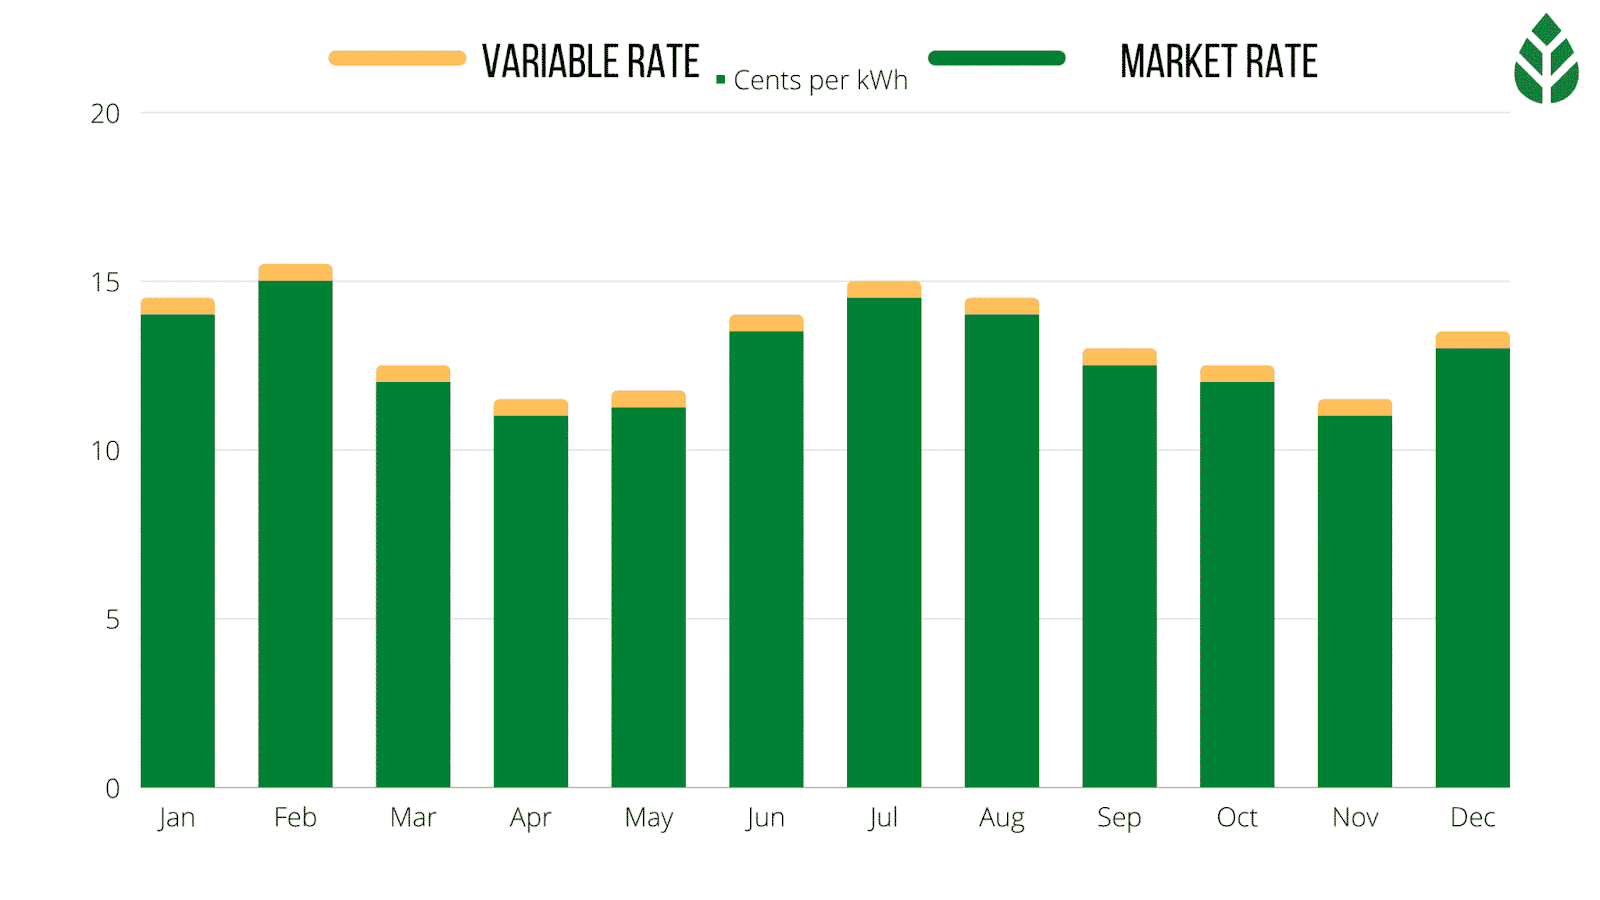 Variable Rate vs Market Rate Electricity Rates in Houston by Month